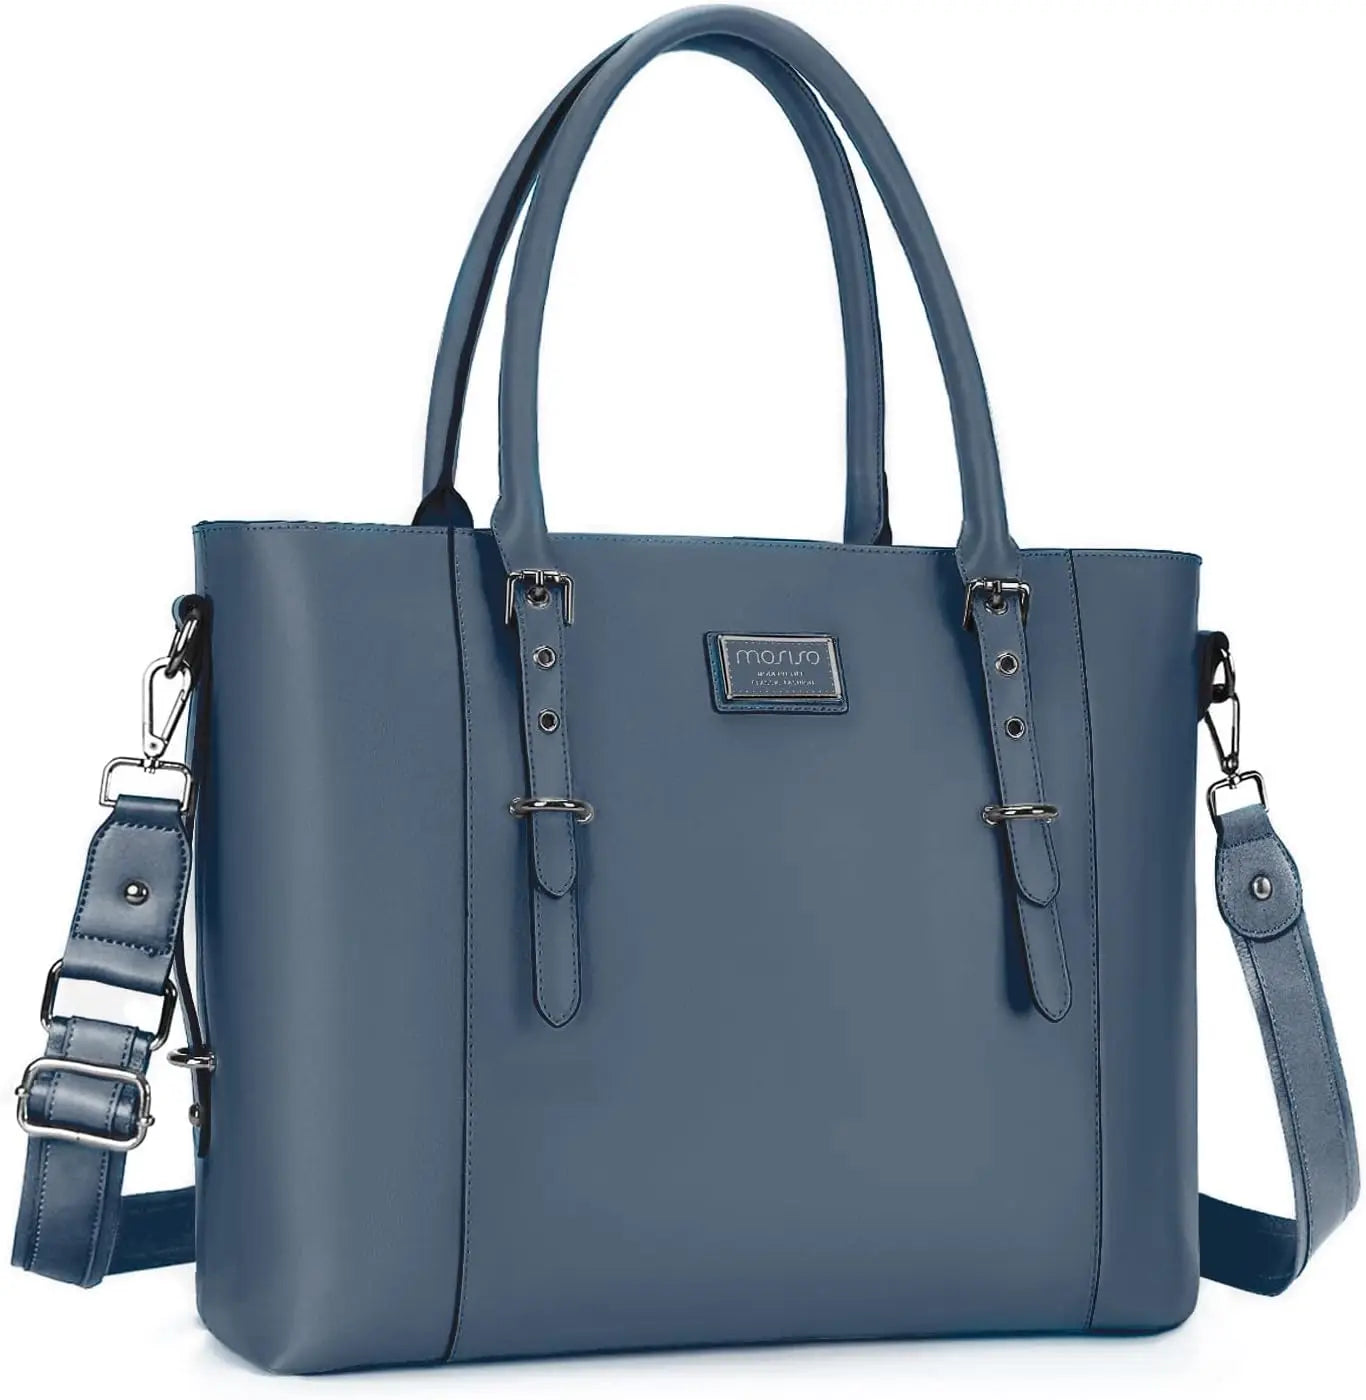 Women's 17 inch Laptop Tote The Store Bags Peacock Blue 17.3 inch 